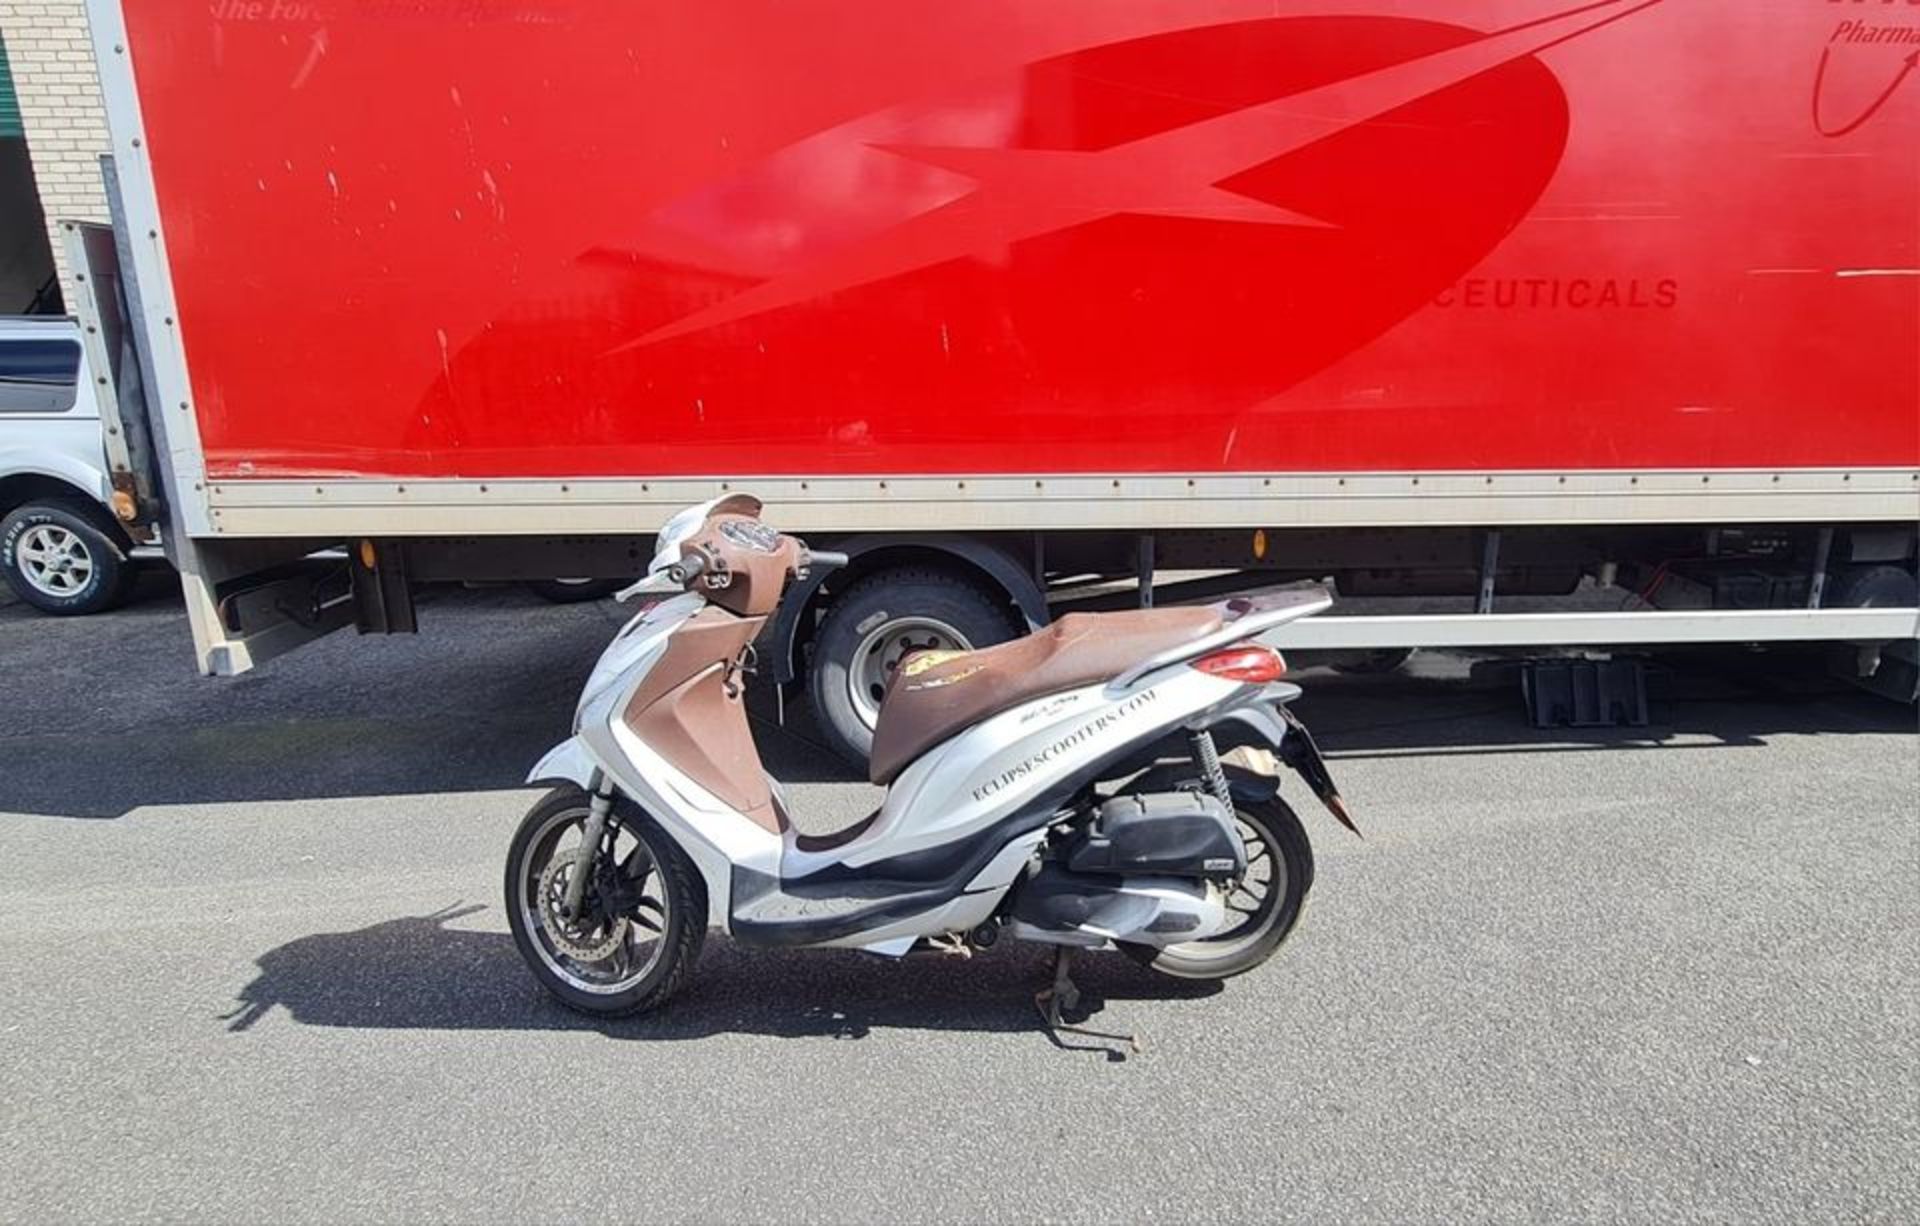 2016 Piaggio Medley 125 Scooter - Missing Key